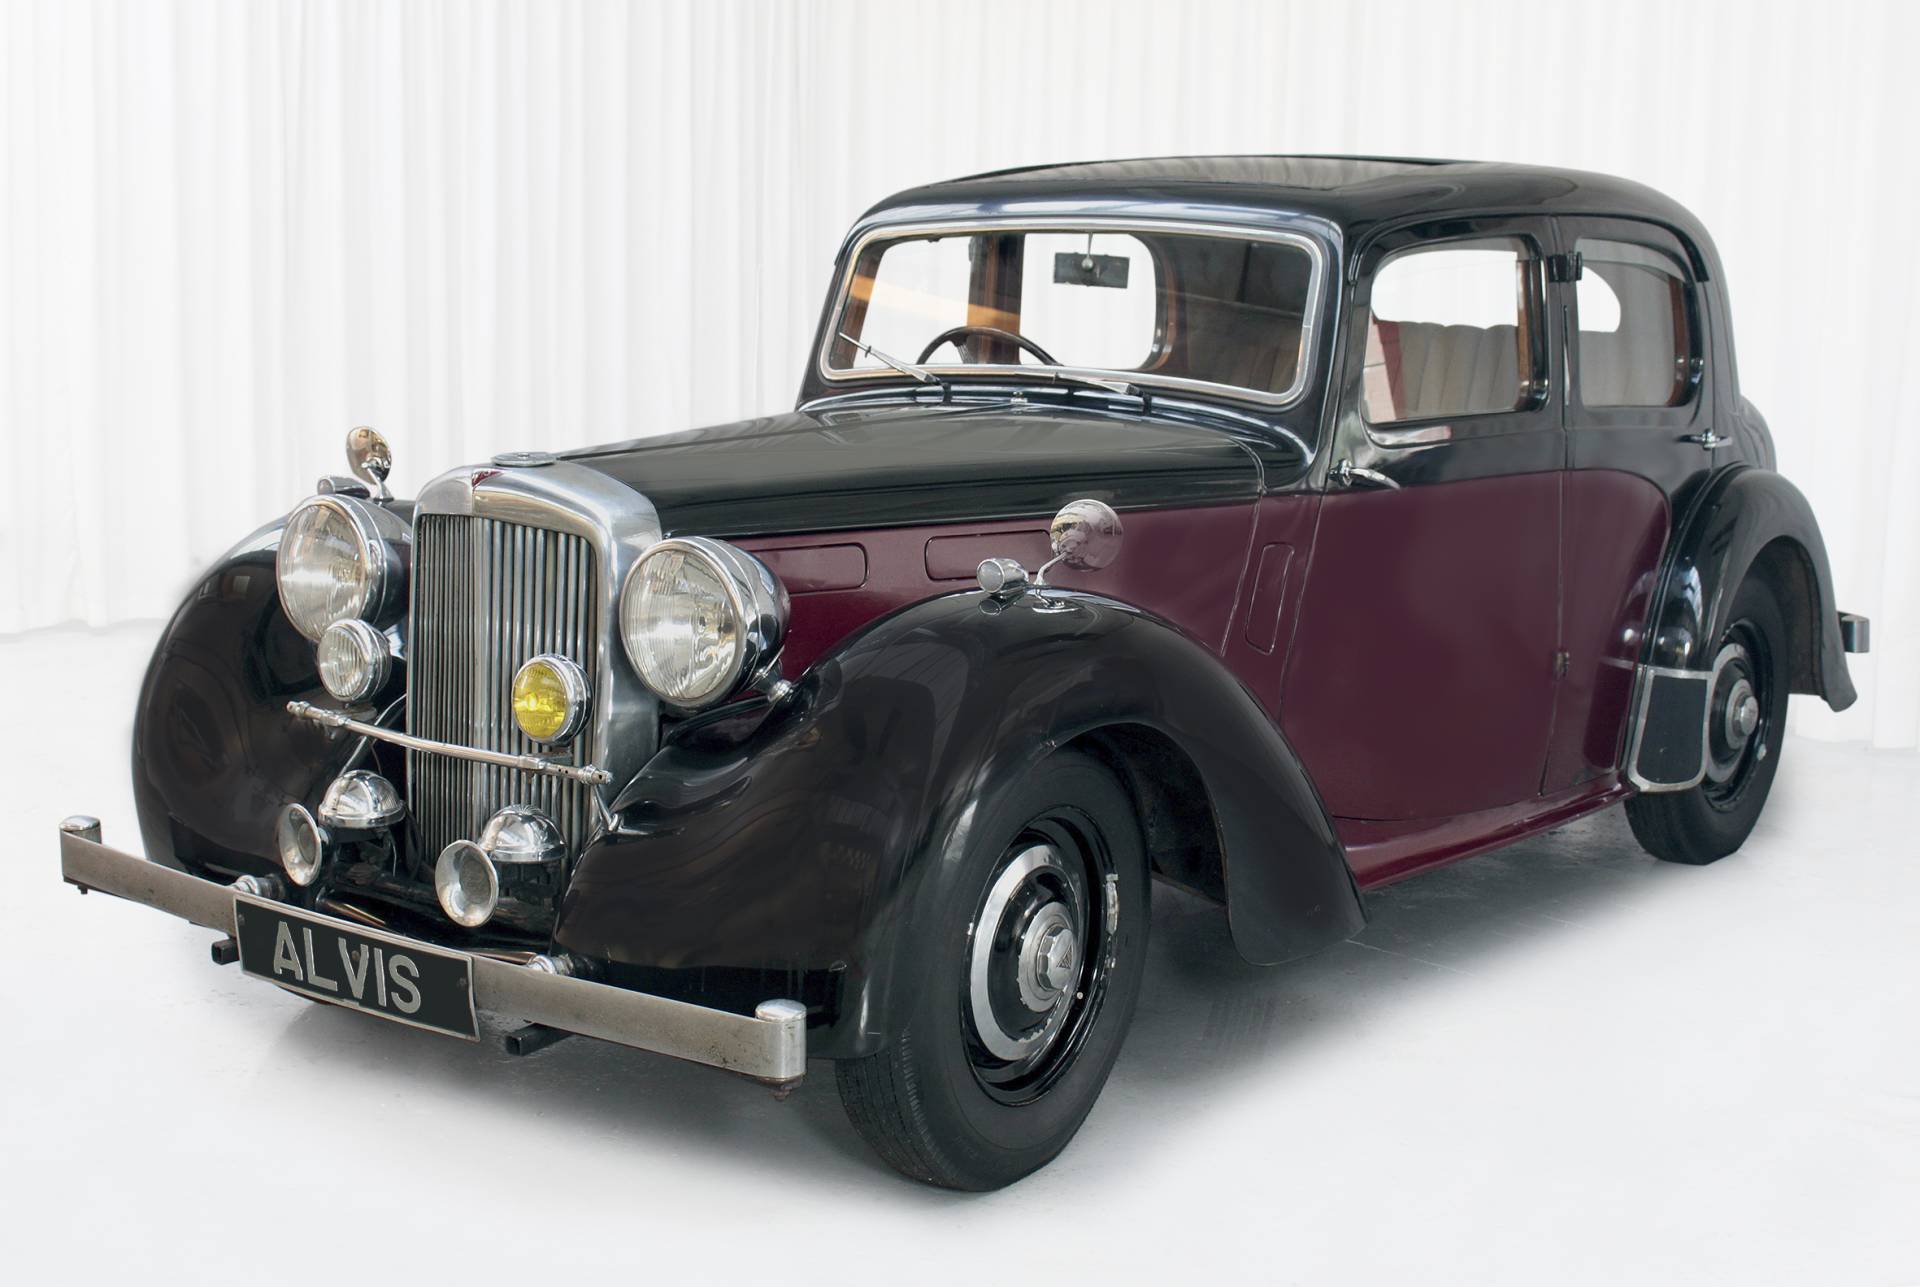 For Sale: Alvis TA 14 (1949) offered for Price on request